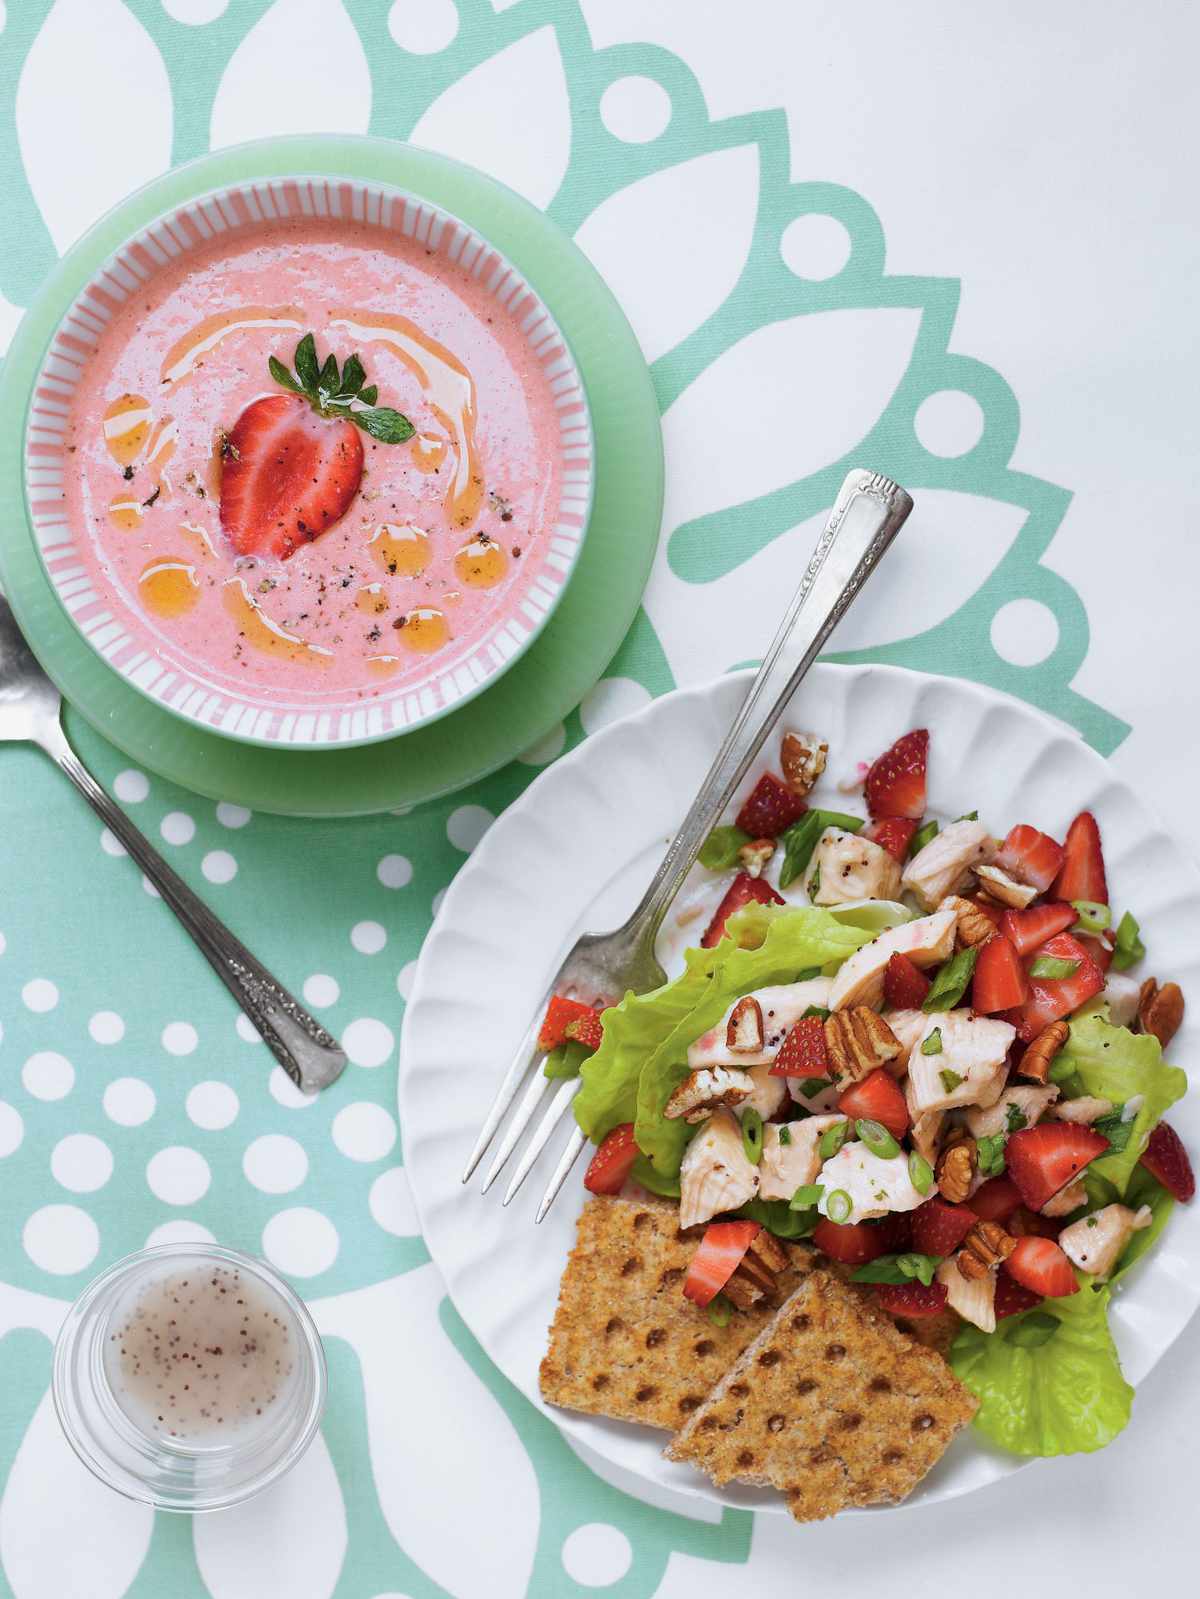 Chilled Strawberry Soup Recipe